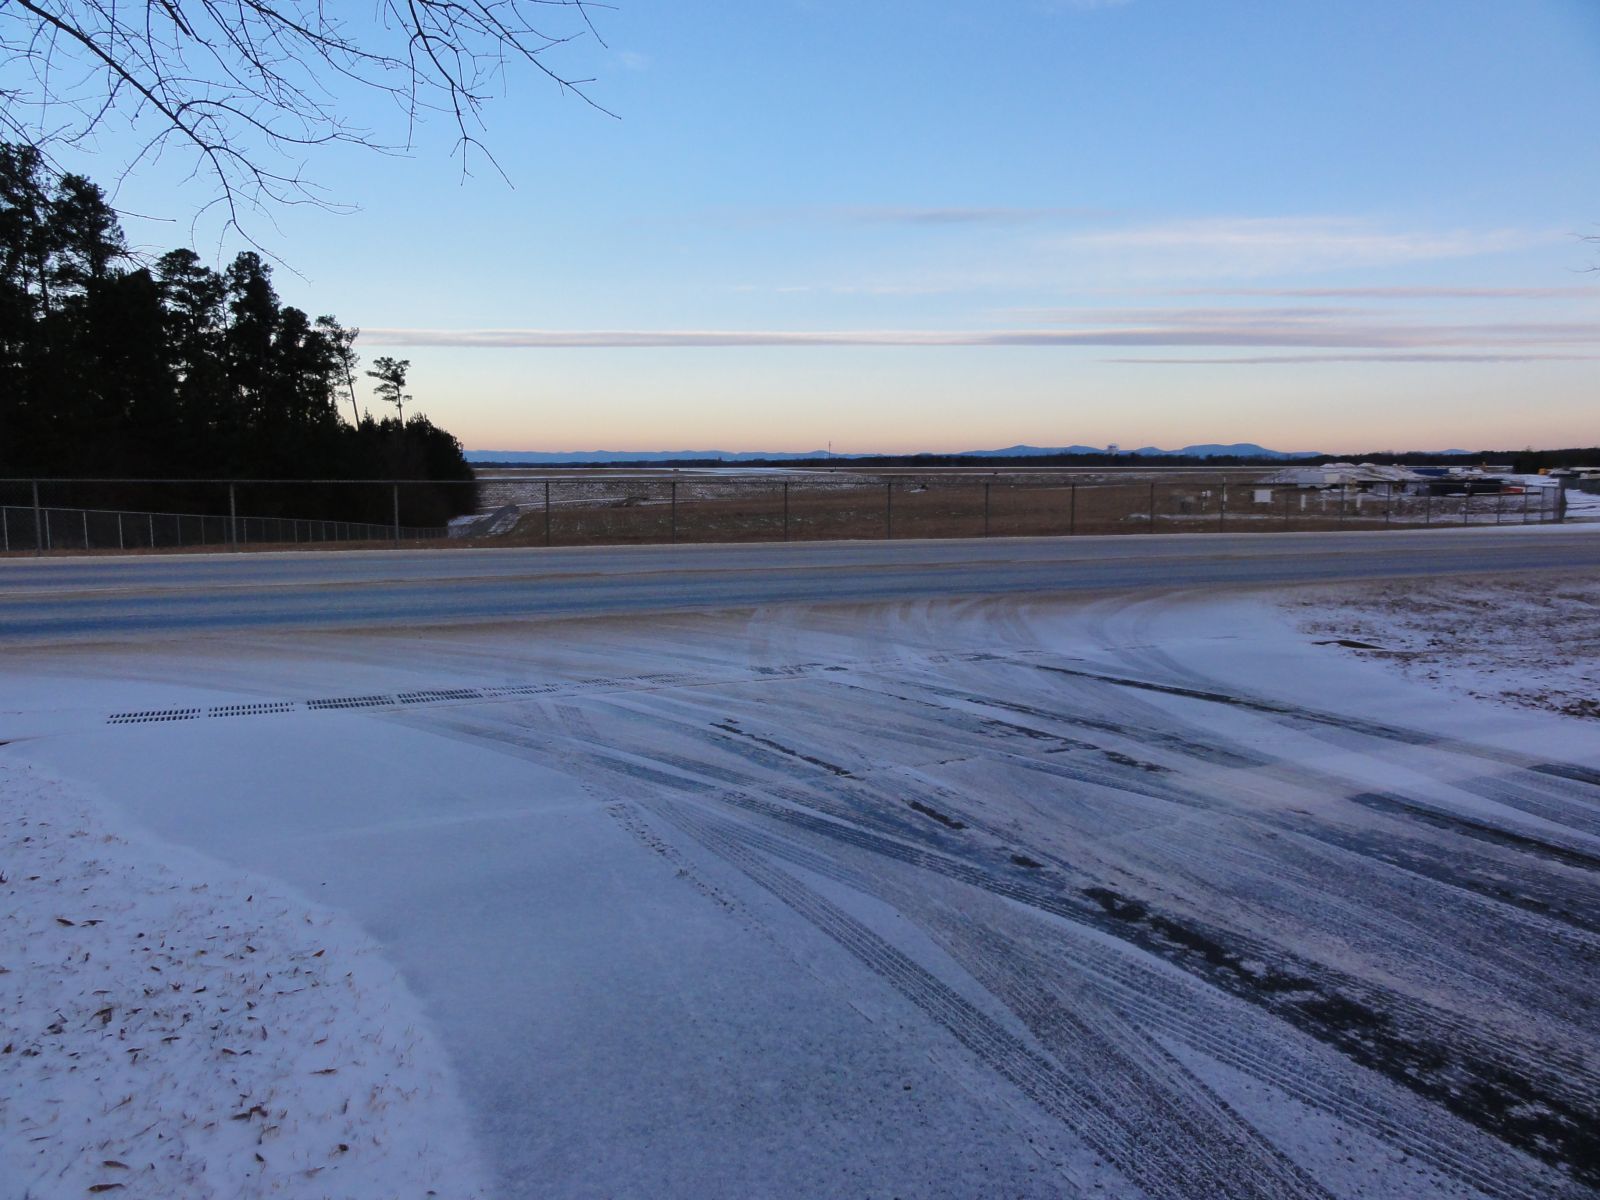 Newly fallen snow on the afternoon of 28 January 2014, at the Greenville - Spartanburg International Airport